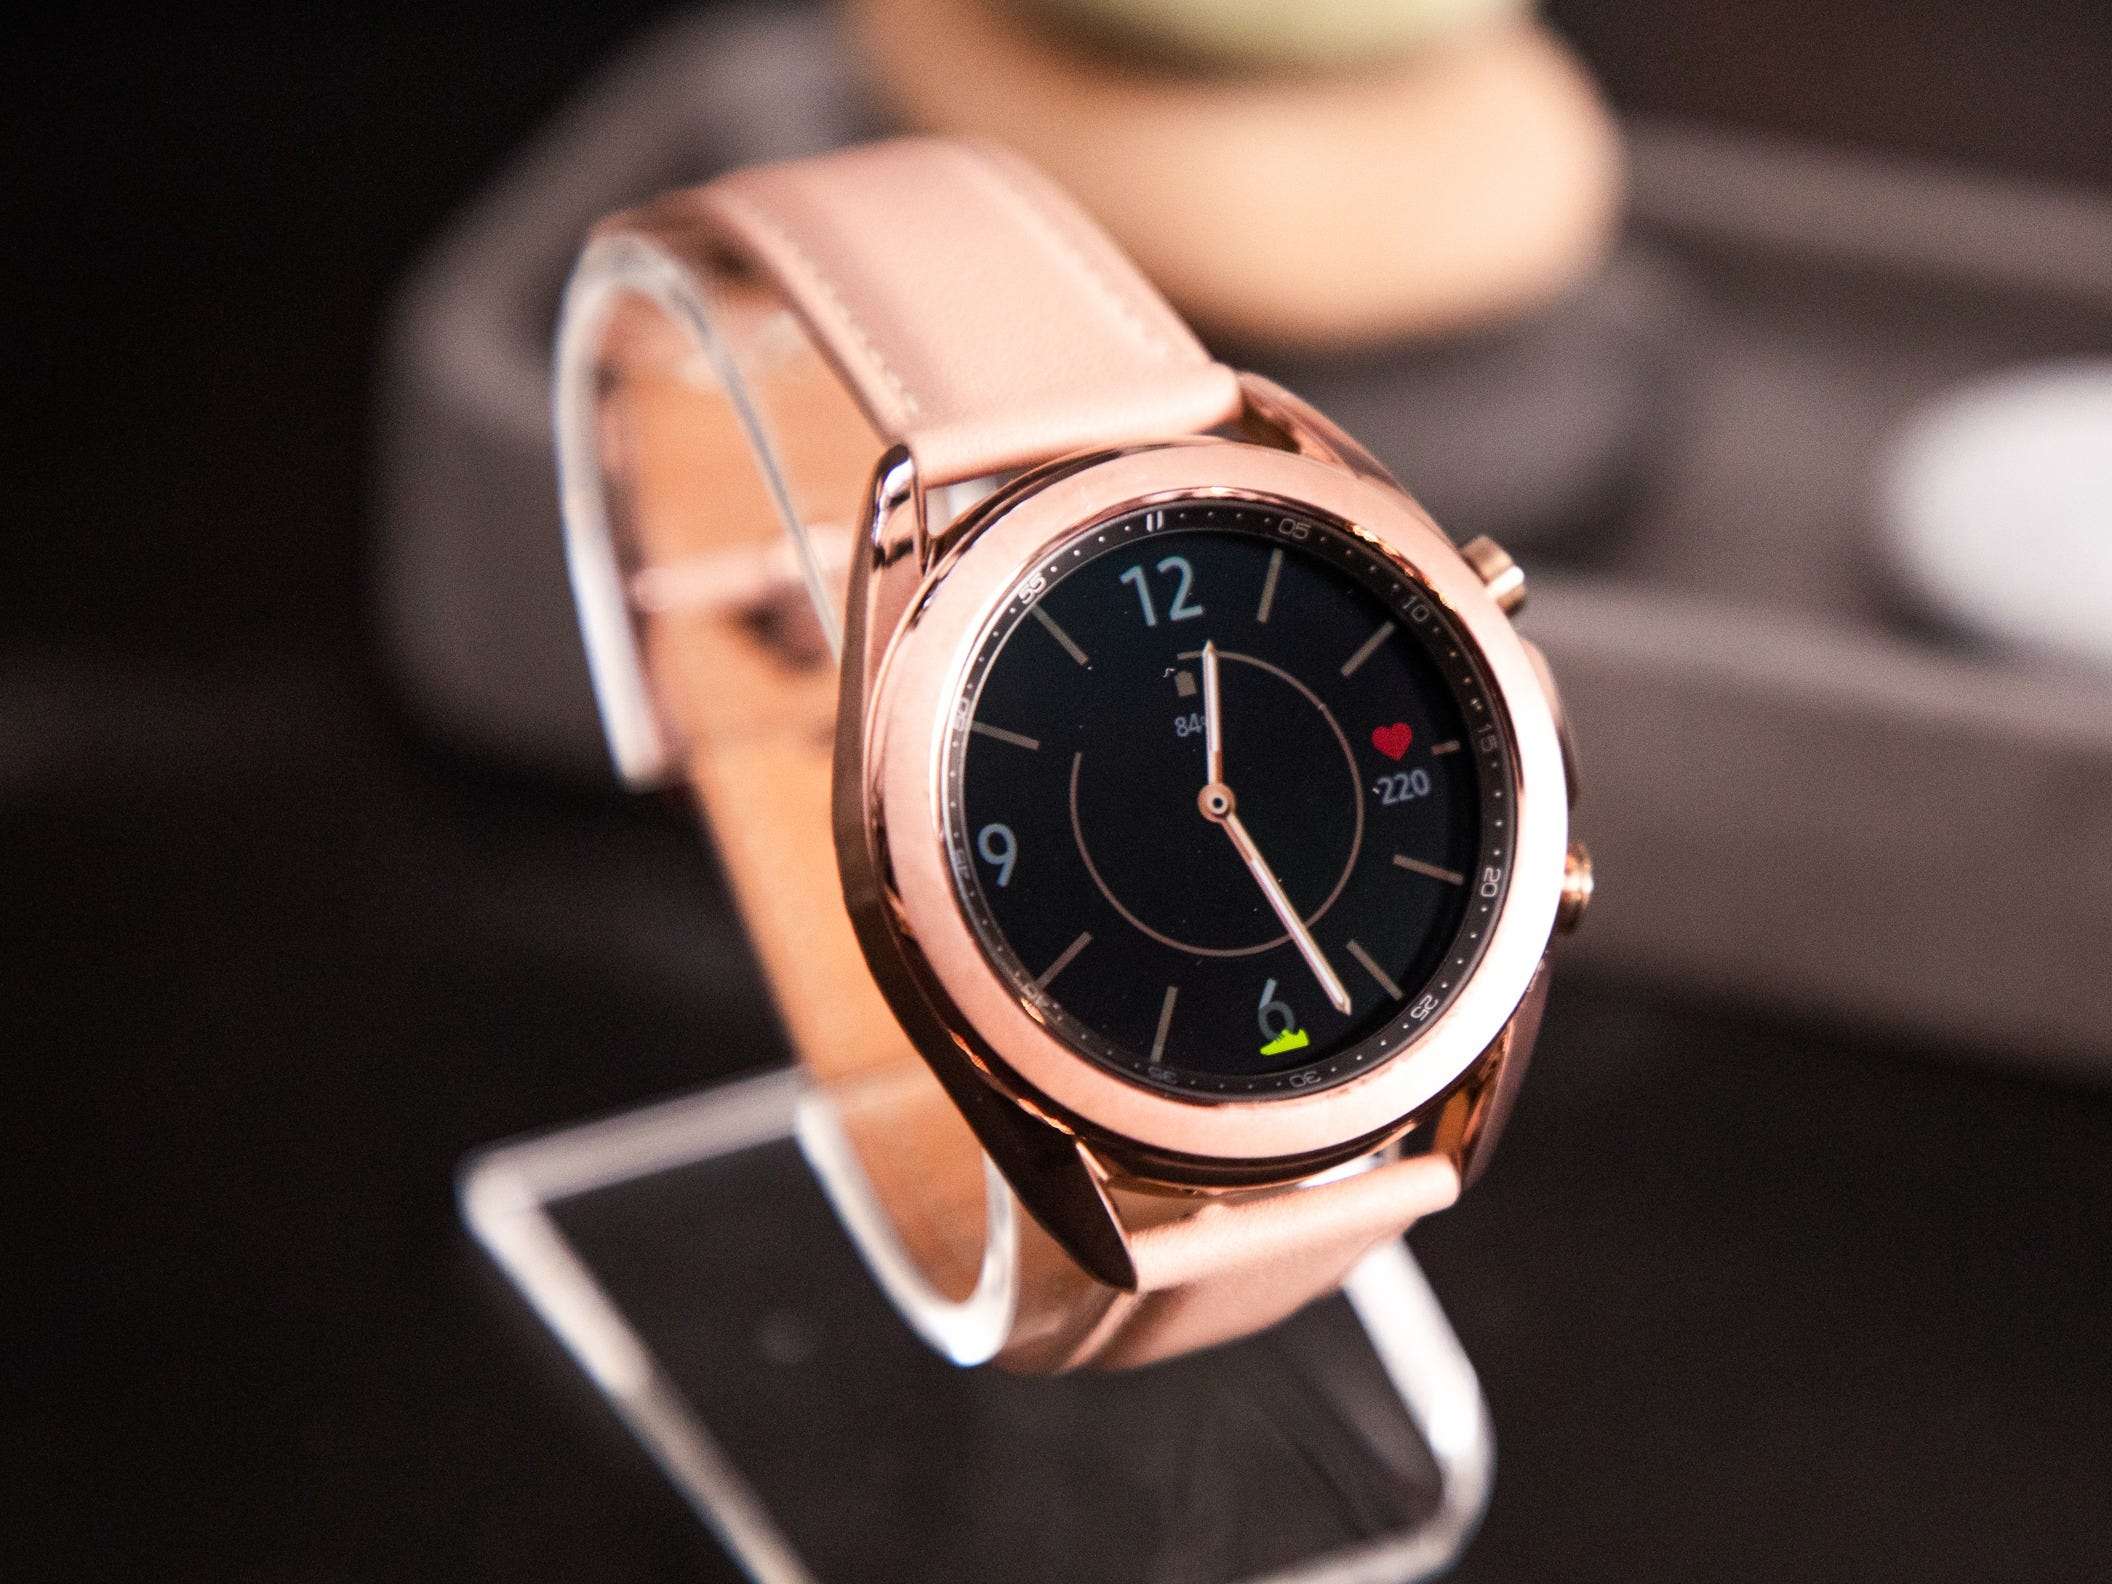 Samsung's latest flagship smartwatch, the Galaxy Watch 3, is now